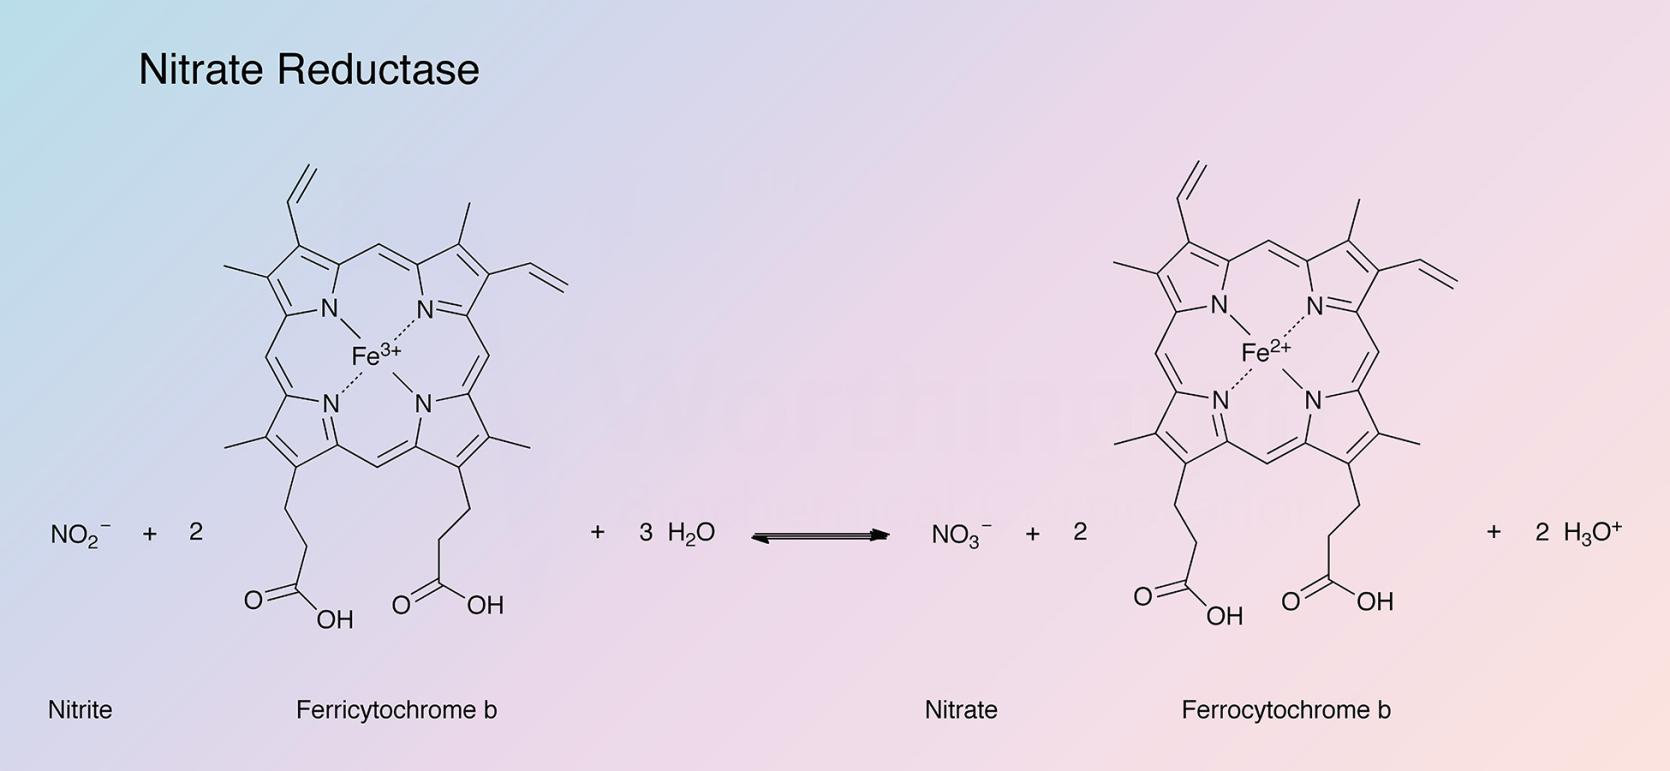 Nitrate Reductase Enzymatic Reaction